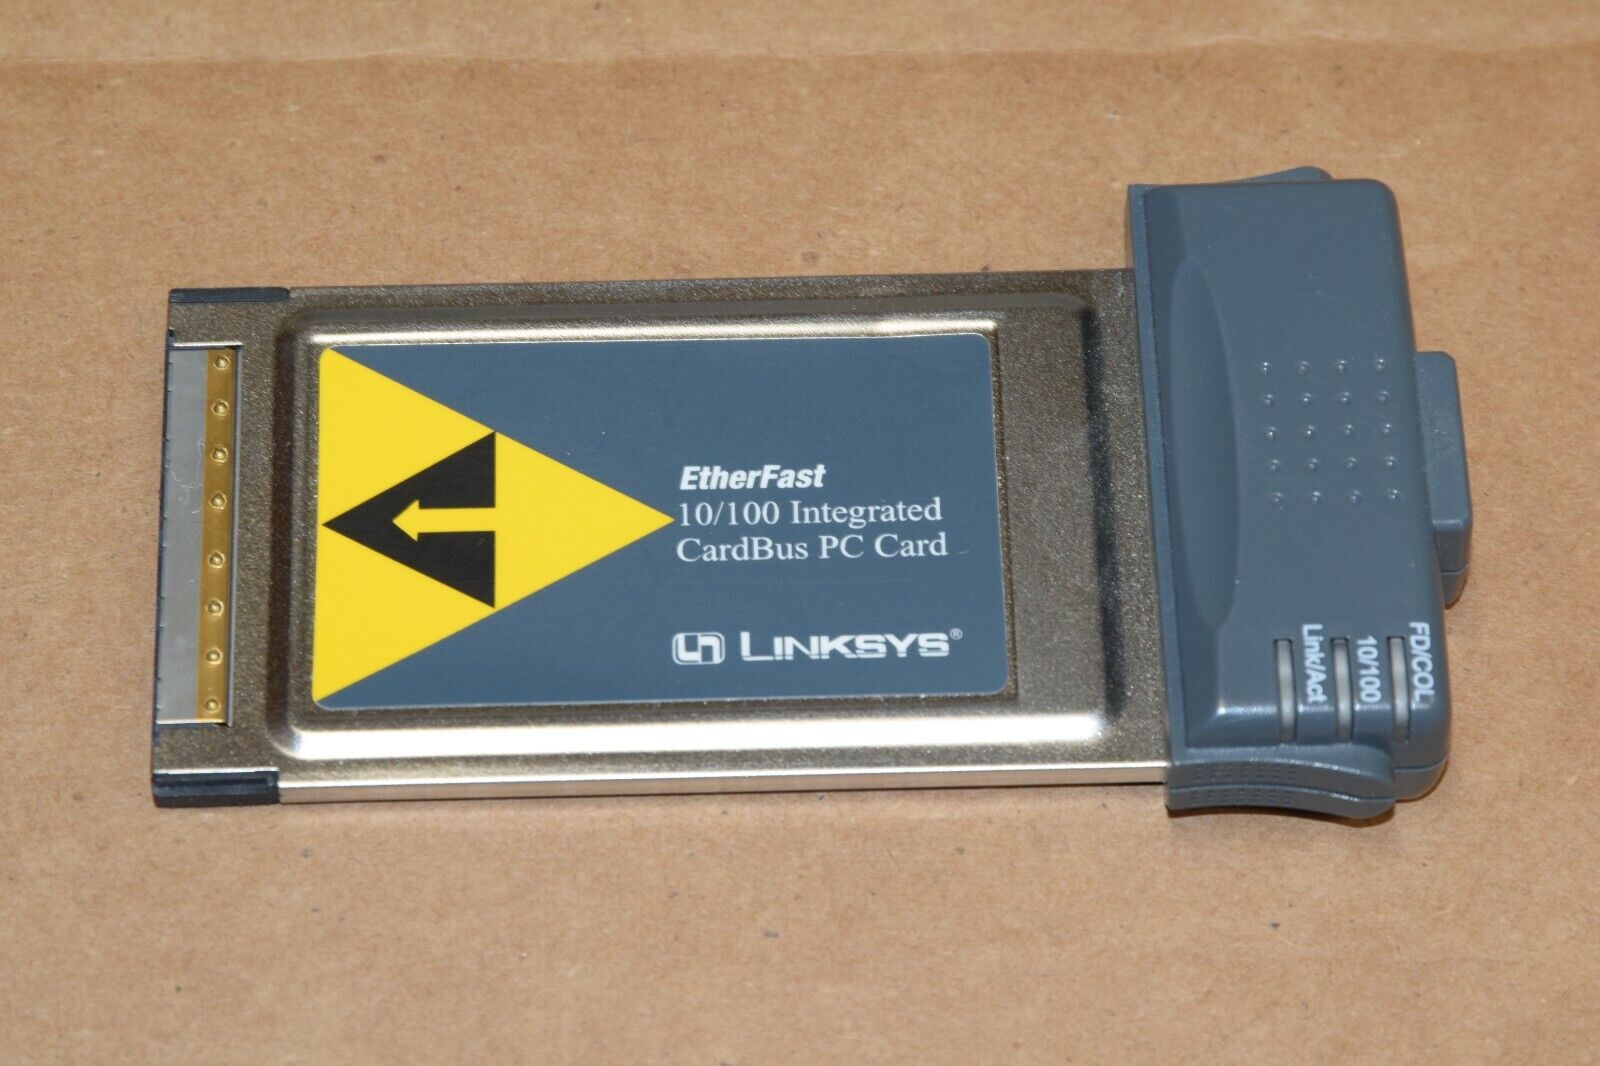 Linksys EtherFast 10/100 Integrated Cardbus Laptop PC Network Card PCM200